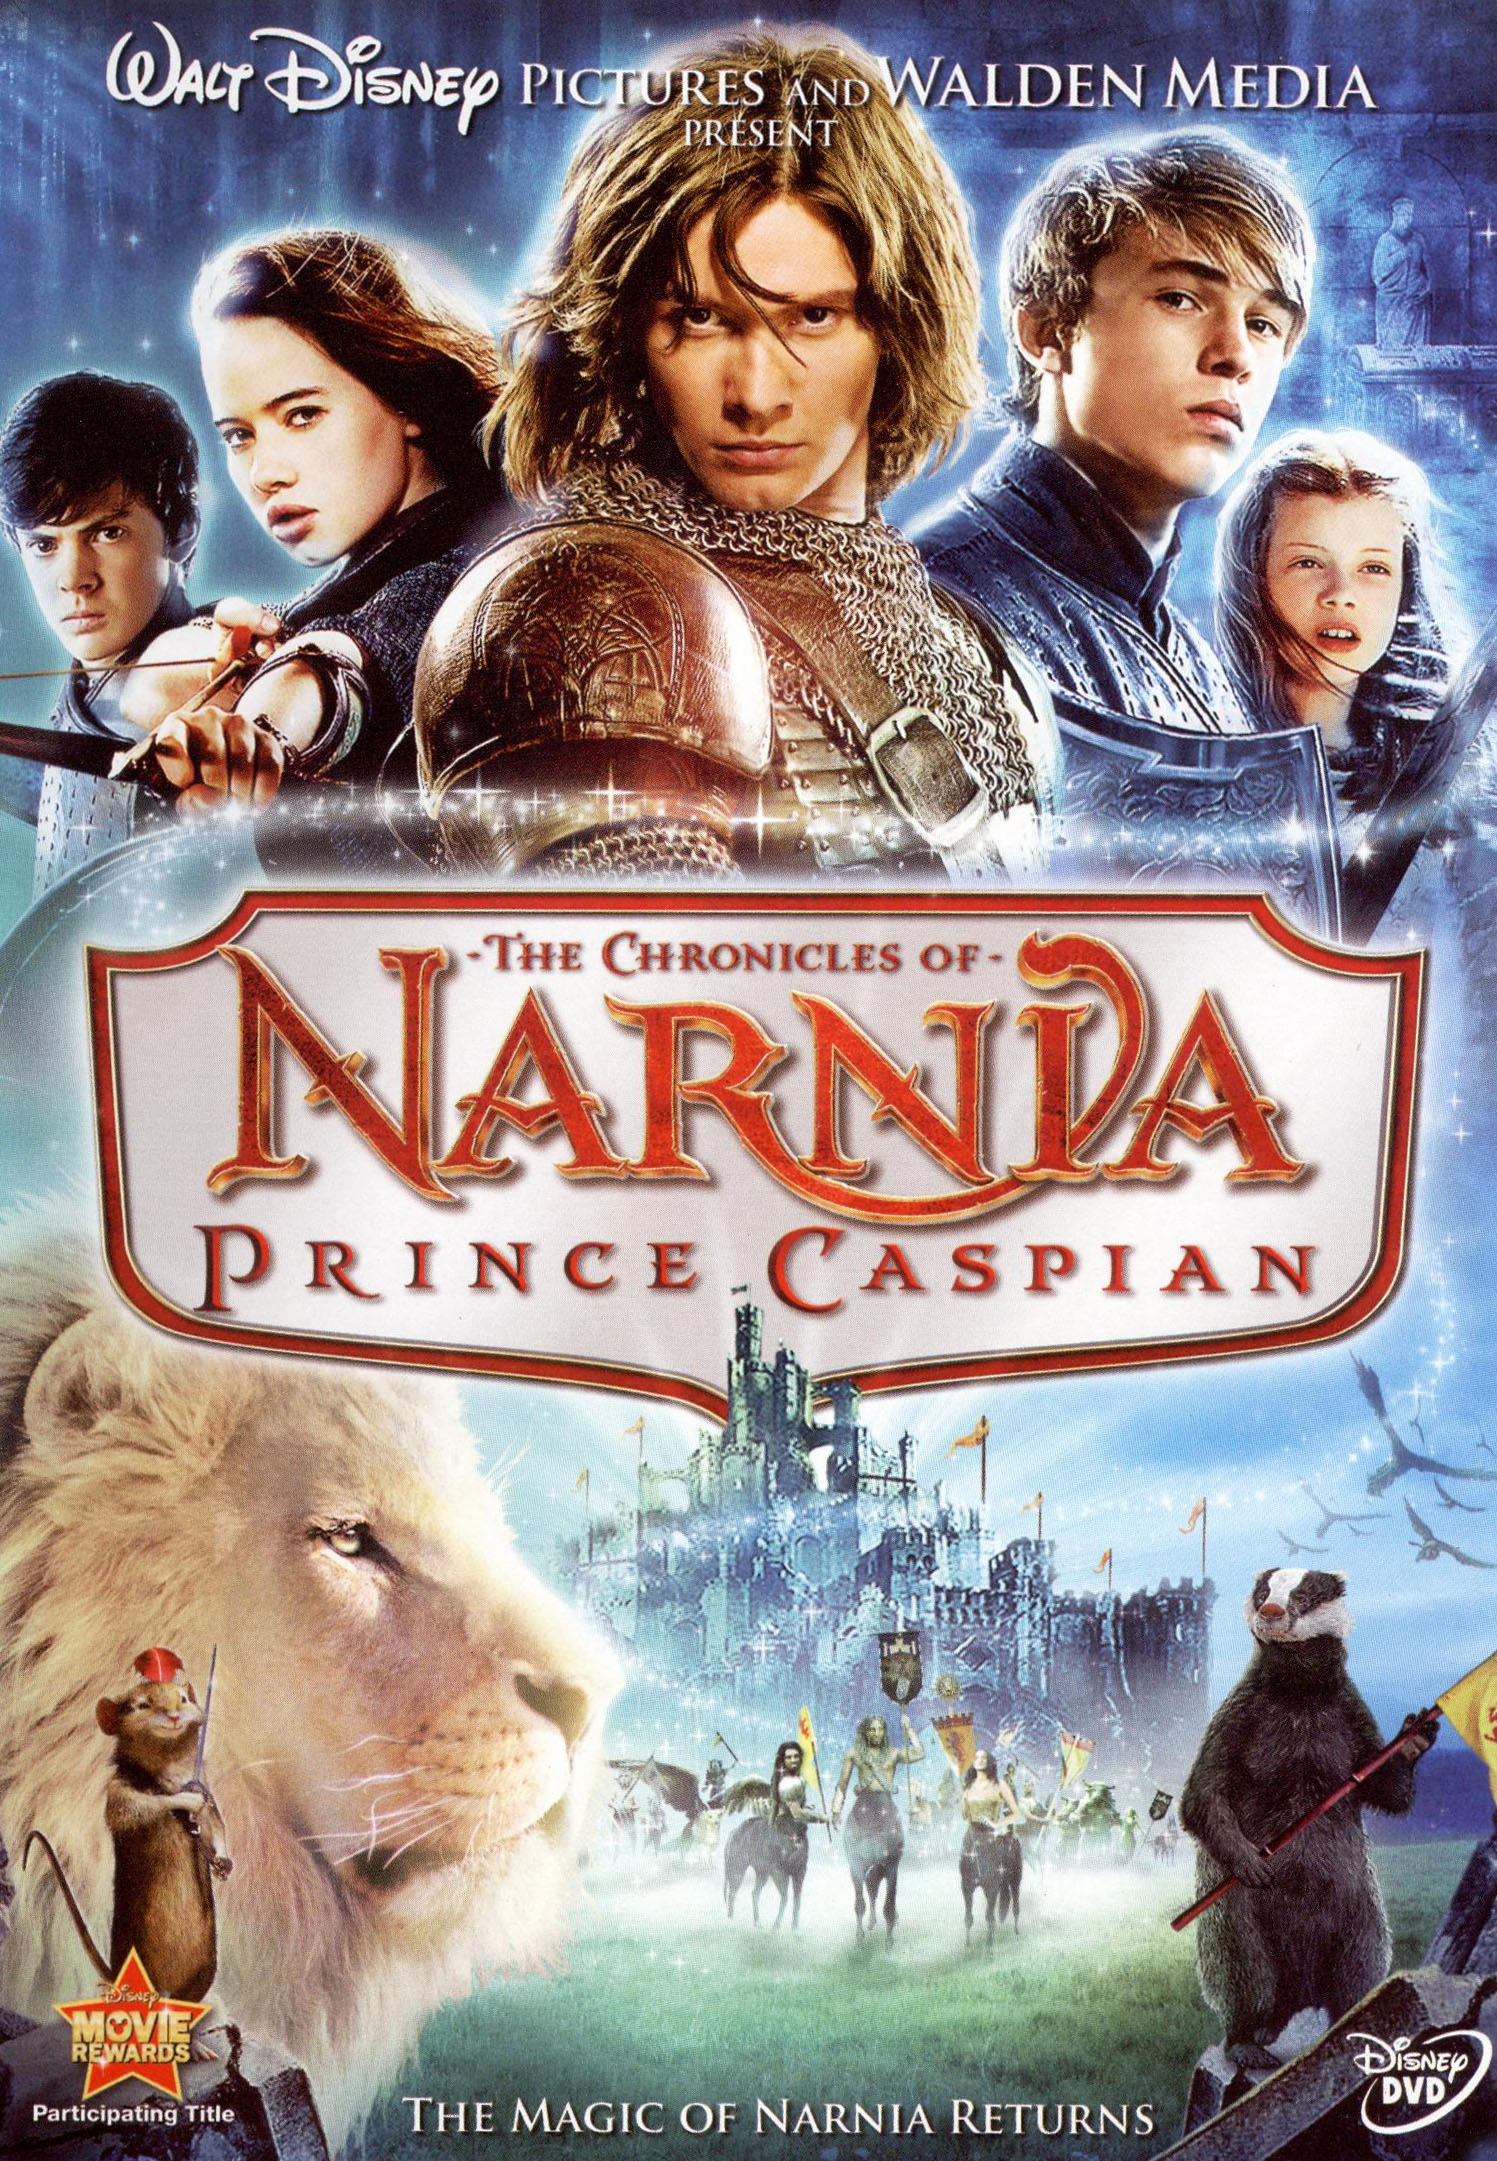 The Chronicles of Narnia: Prince Caspian [DVD] [2008]